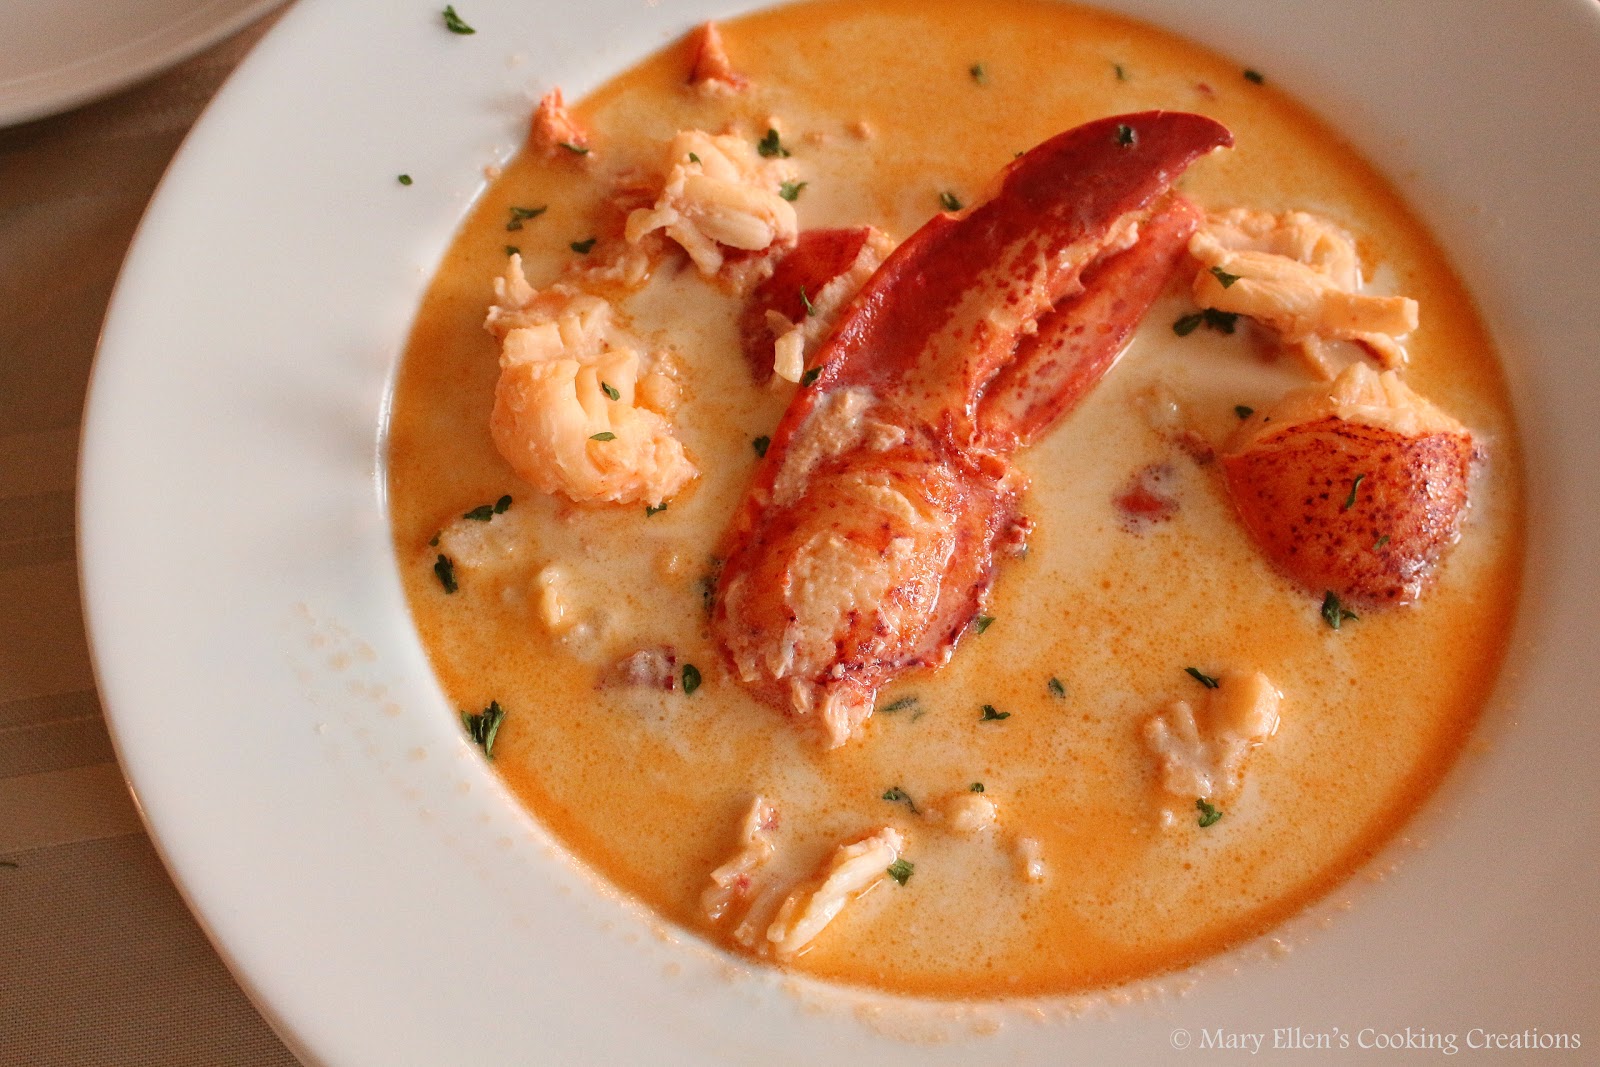 Mary Ellen's Cooking Creations: Maine Lobster Stew